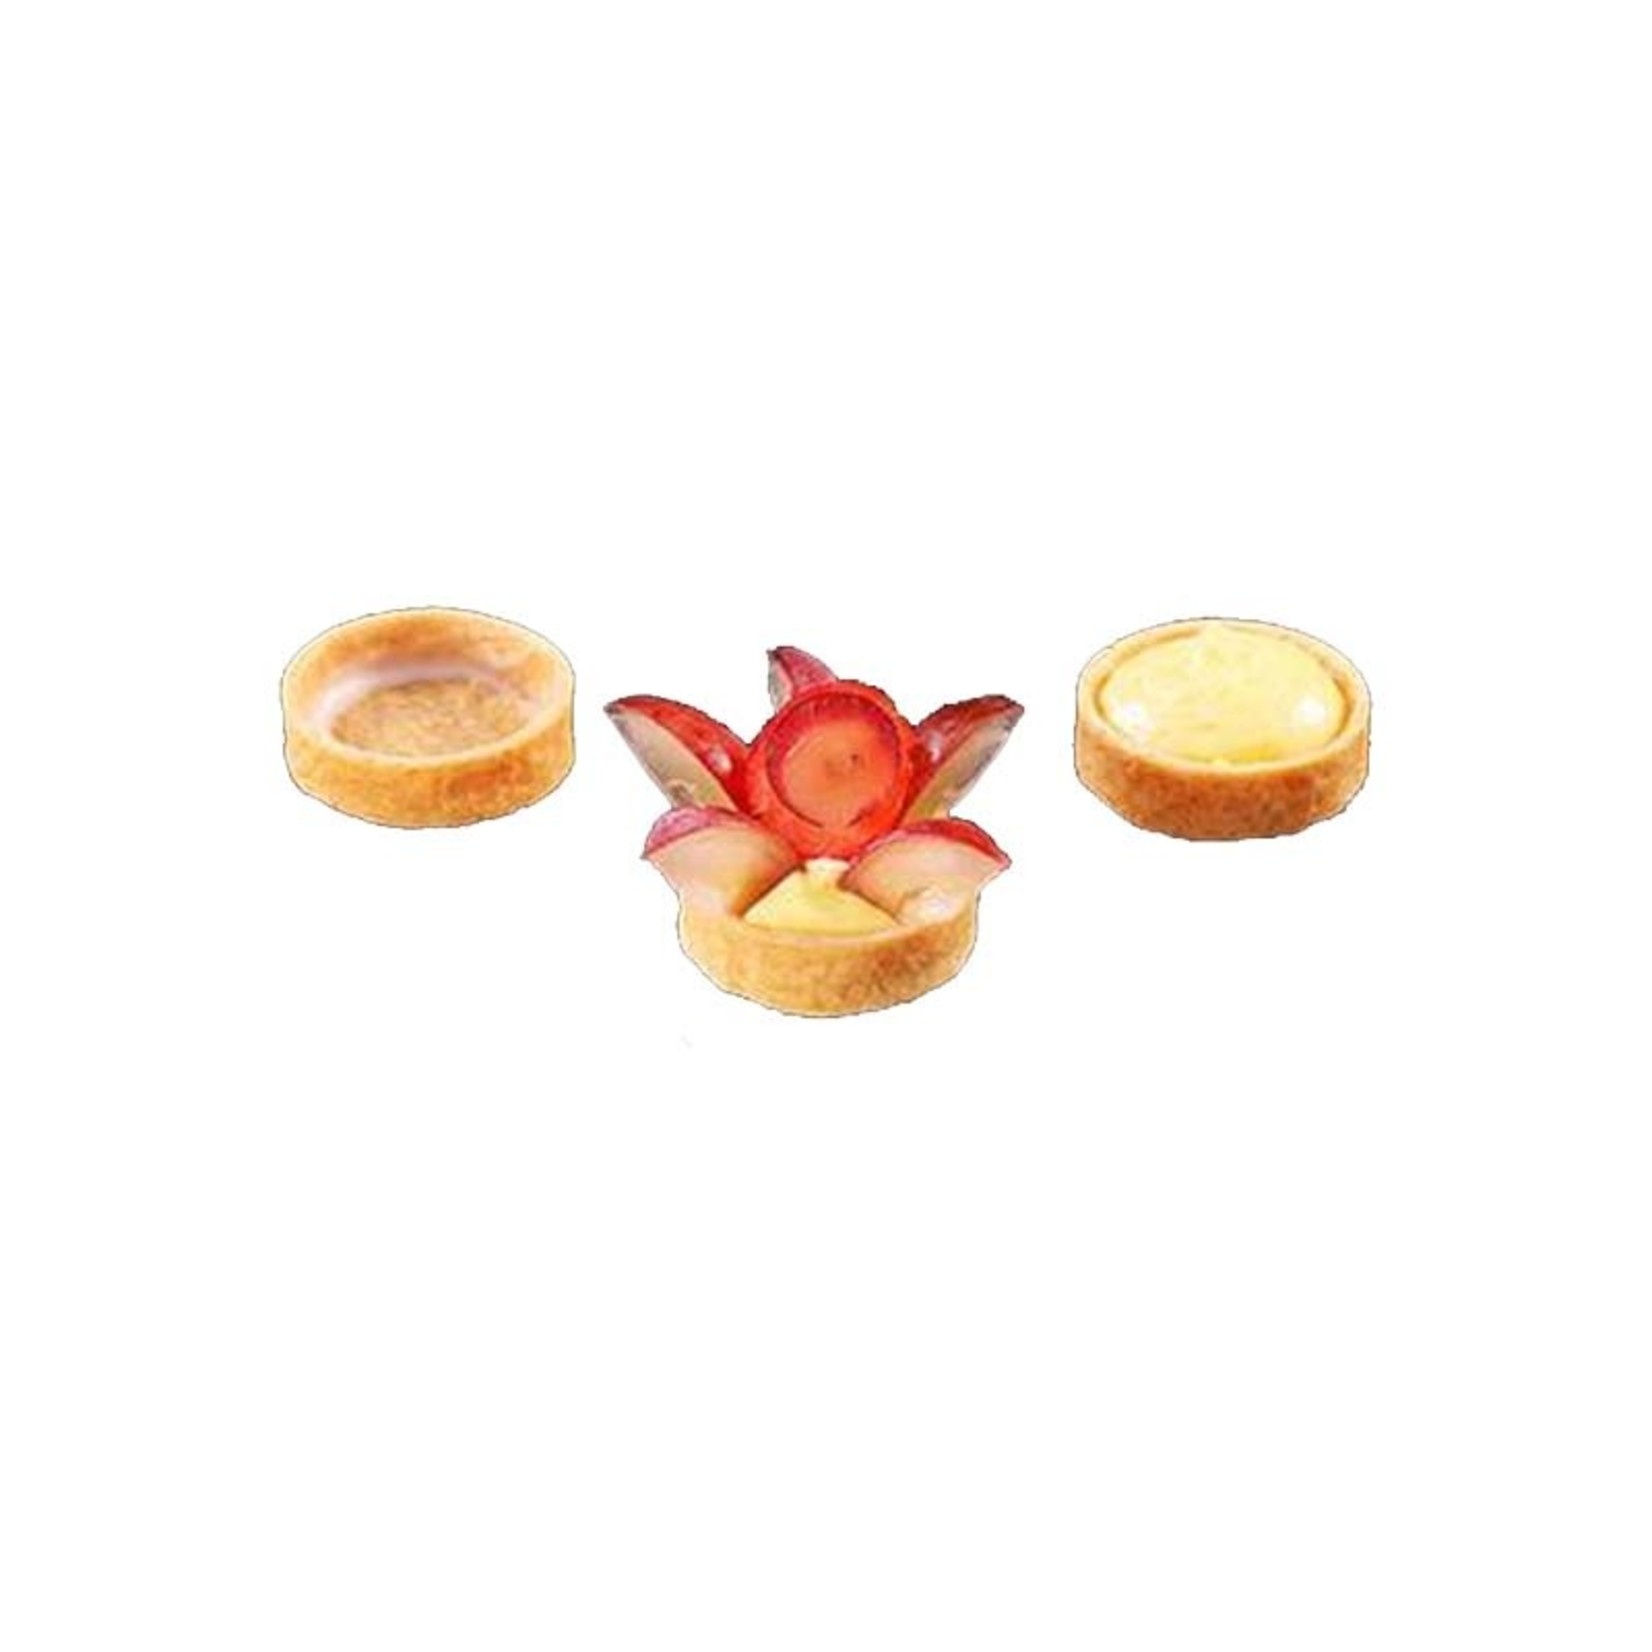 Le Chic Patissier Le Chic Patissier - Sweet Round Tart shell - 2" (20 ct) sleeve